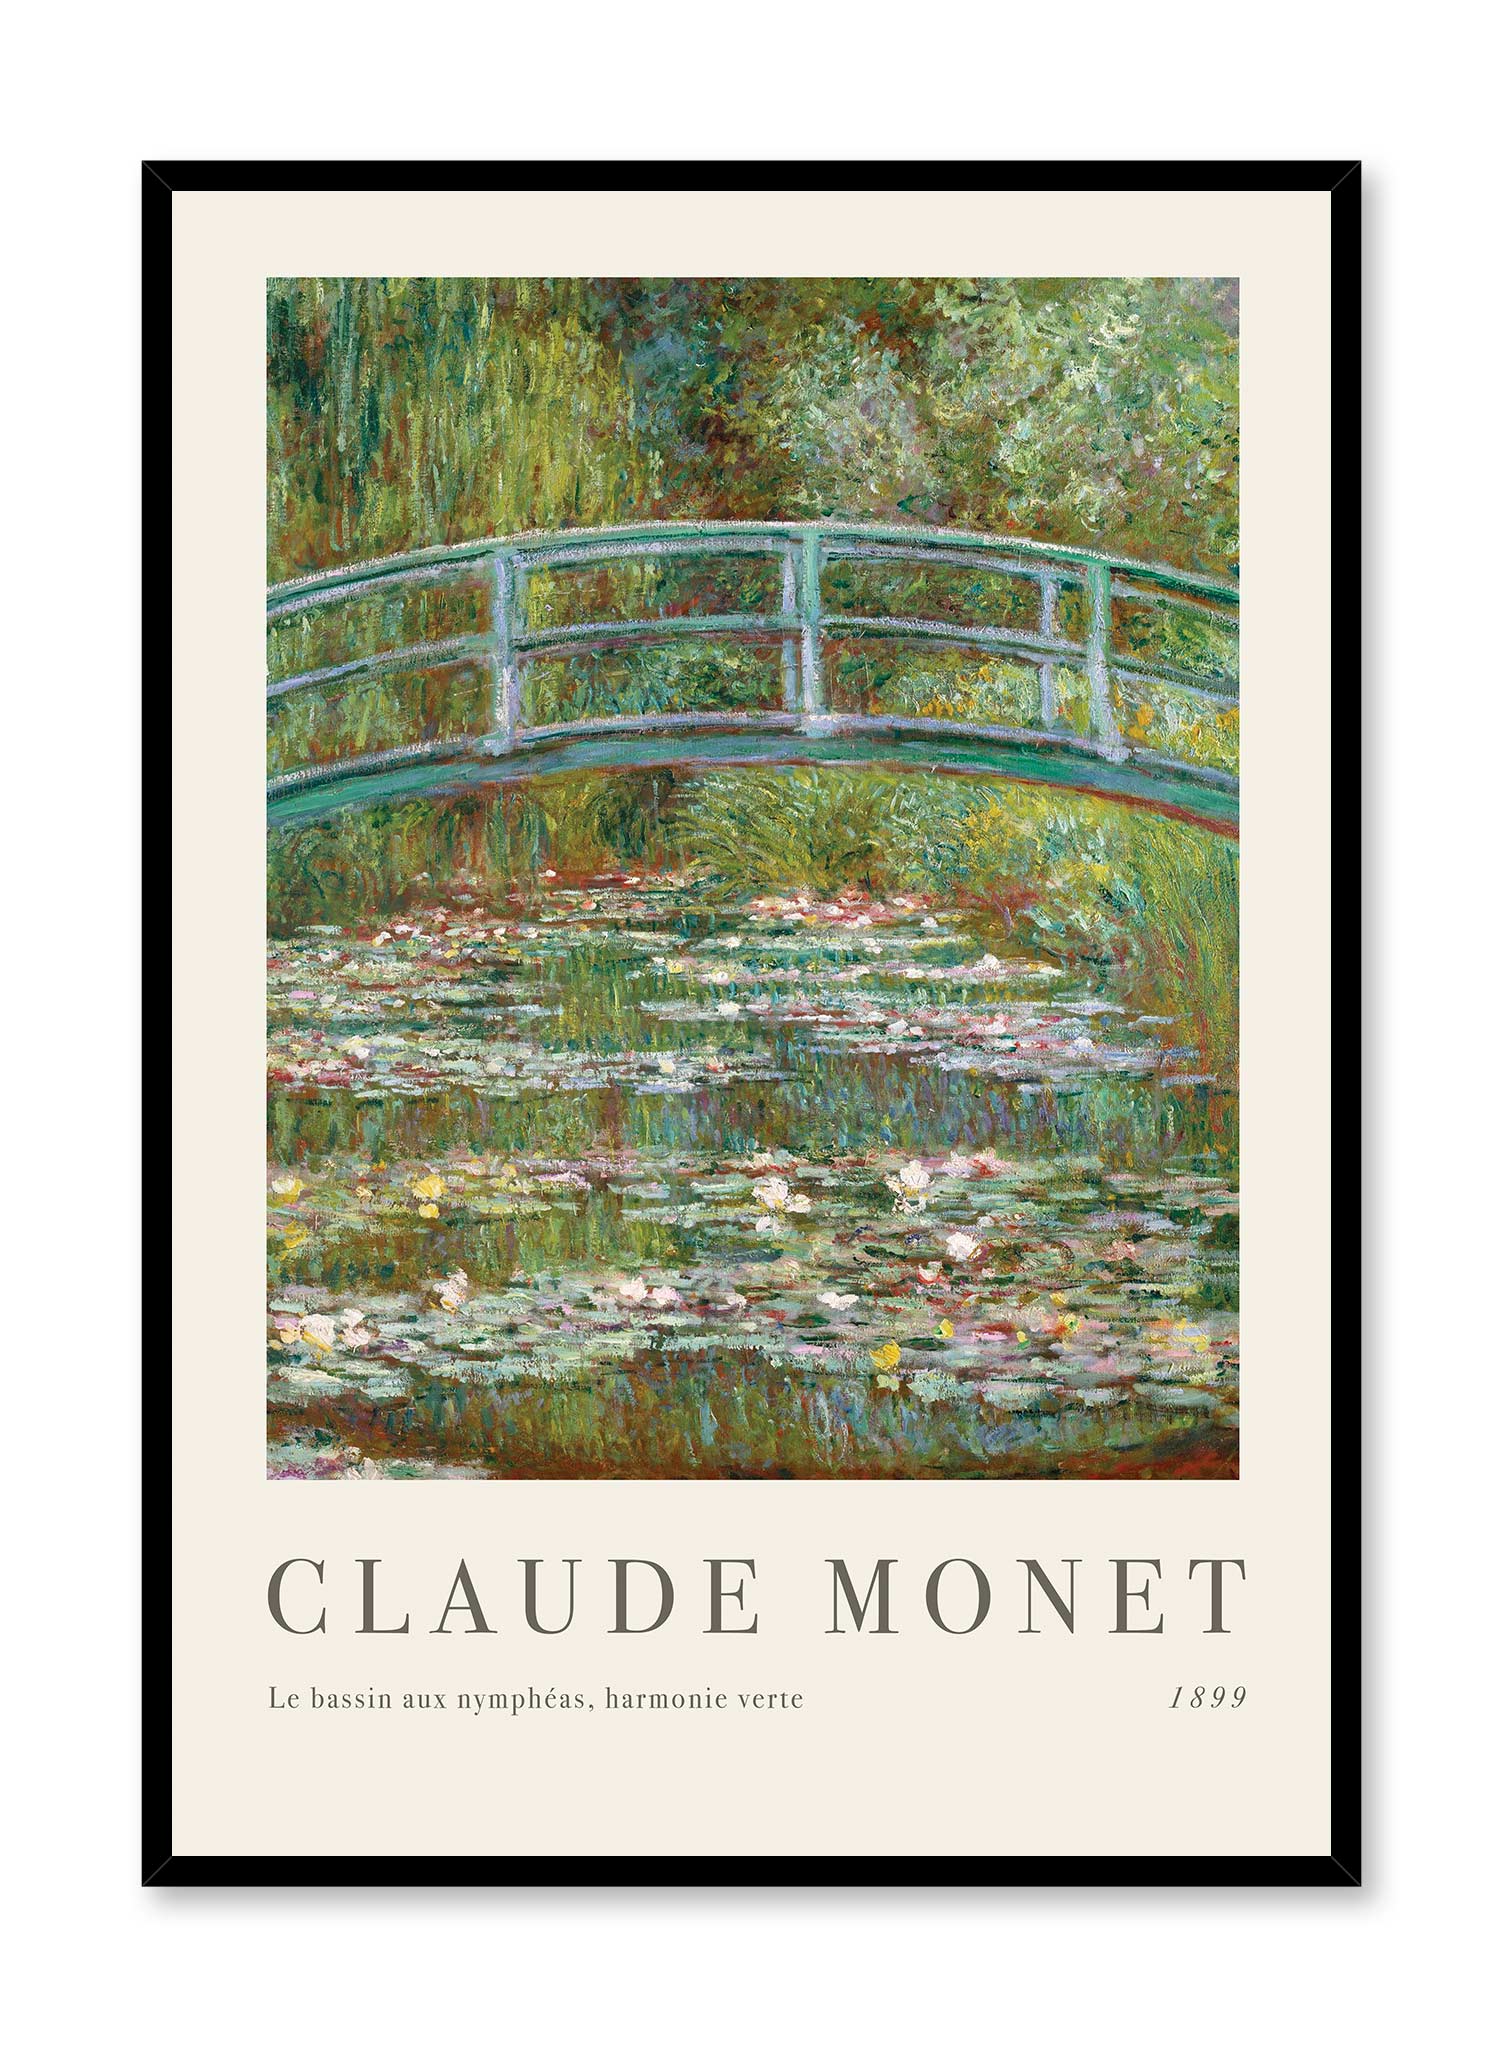 Bridge over a Pond of Water Lilies is a minimalist artwork by Opposite Wall of Claude Monet's Le bassin aux nymphéas, harmonie verte from 1889. 